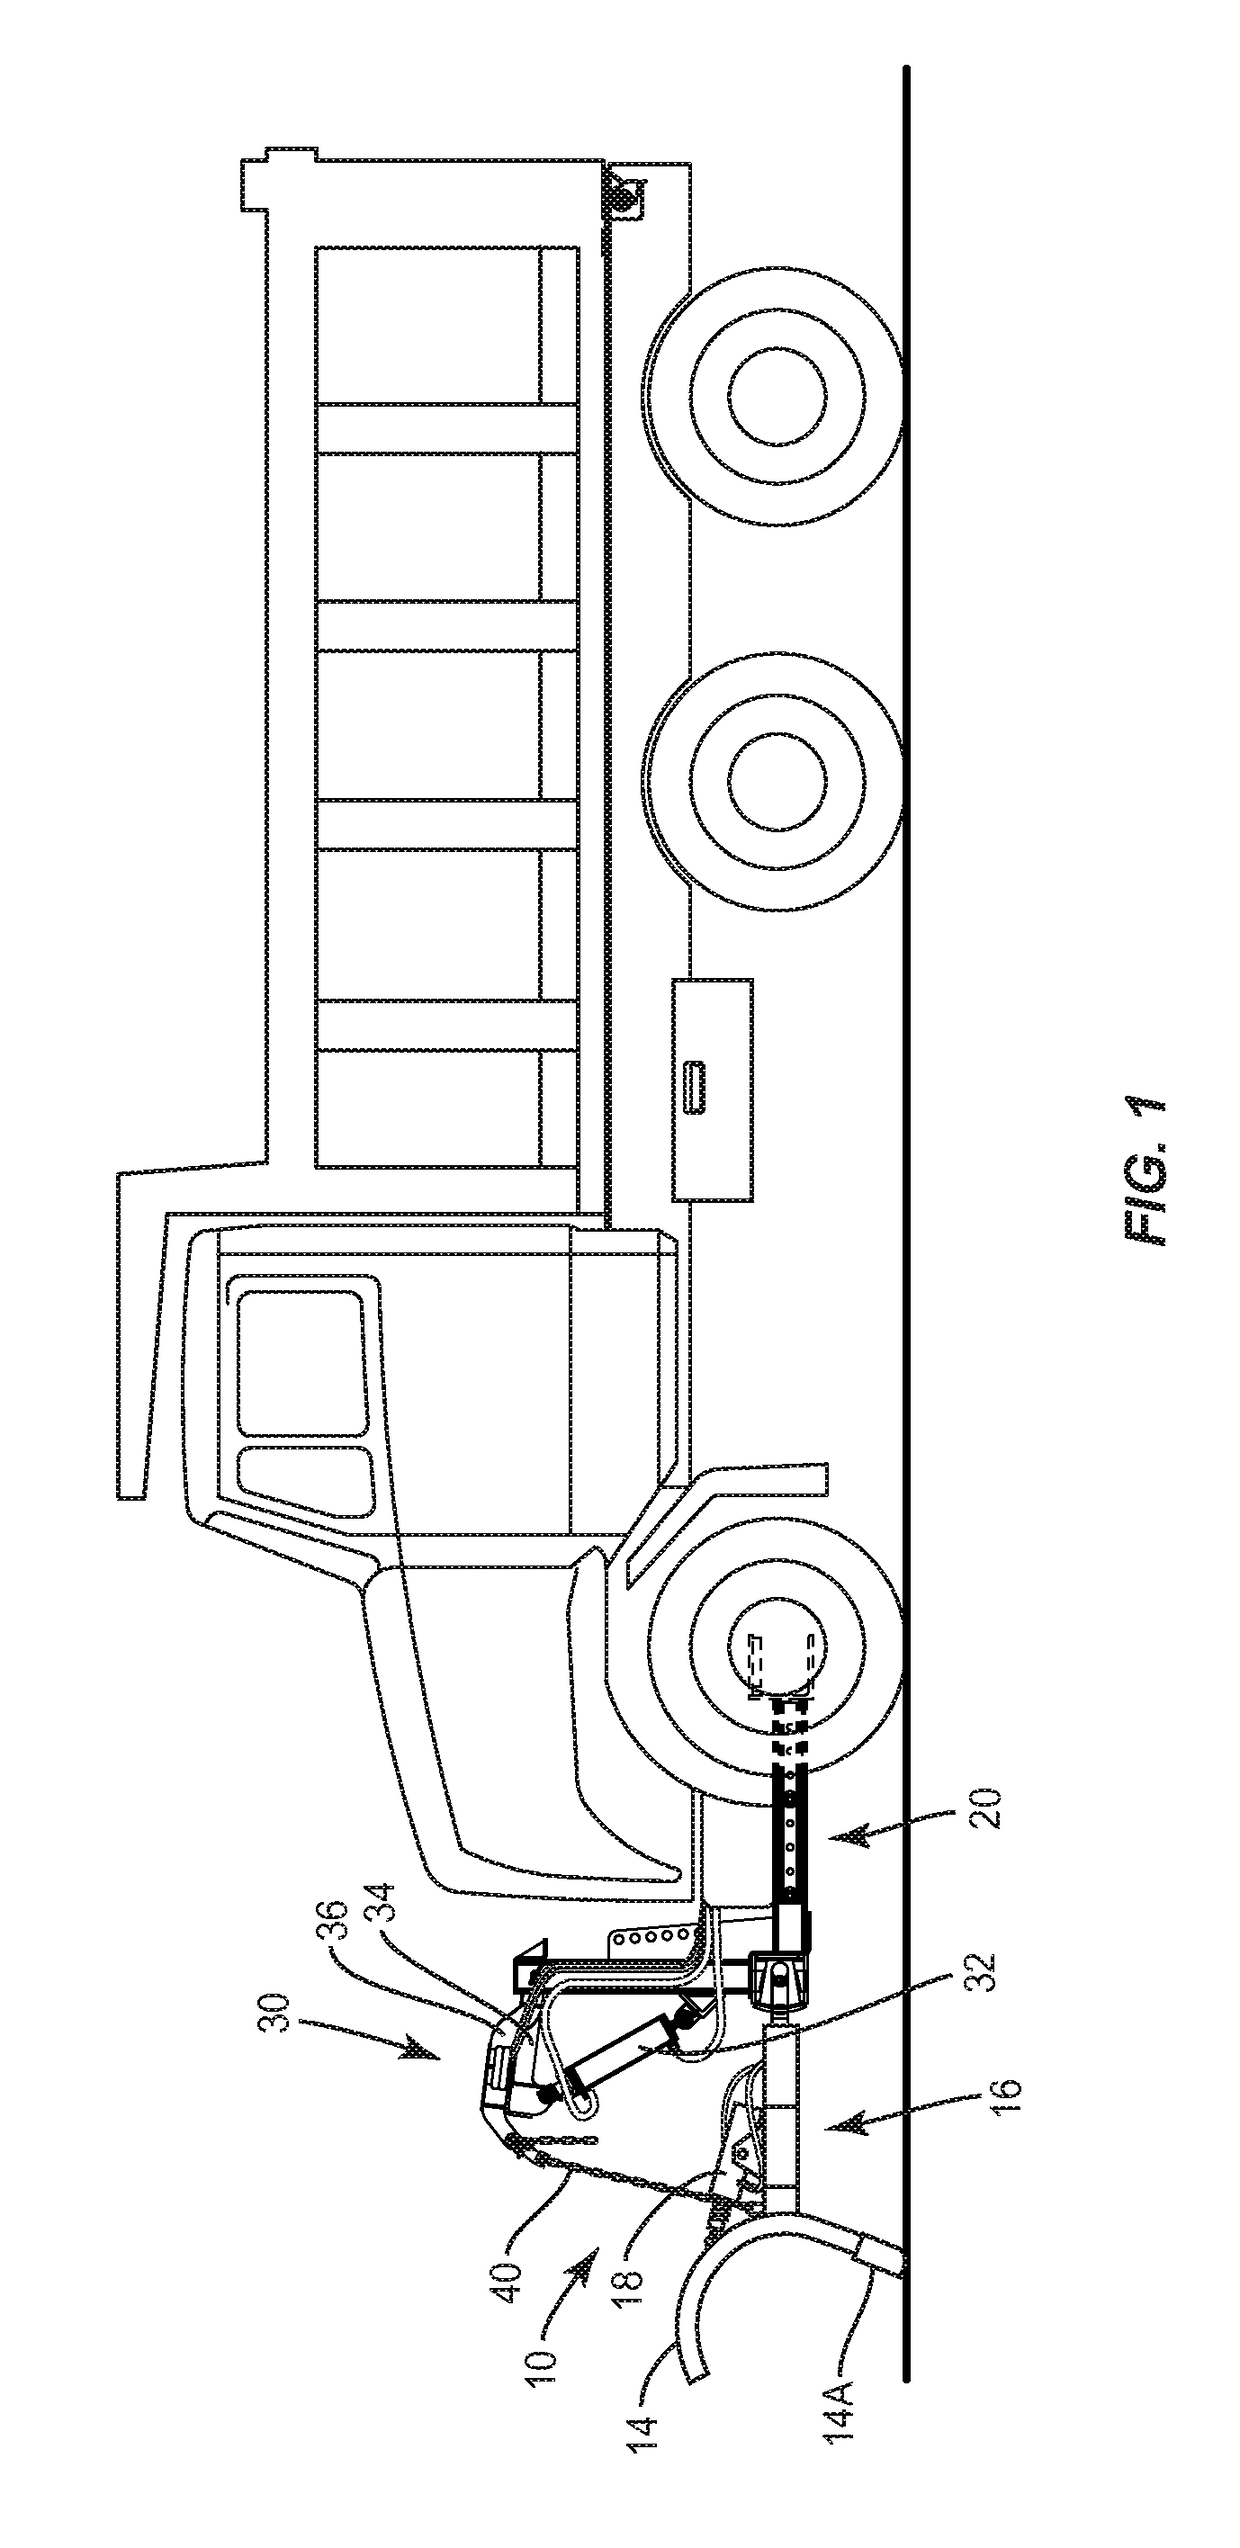 Snow plow having a pneumatic lifting device for reducing the wear on the blade of the snow plow